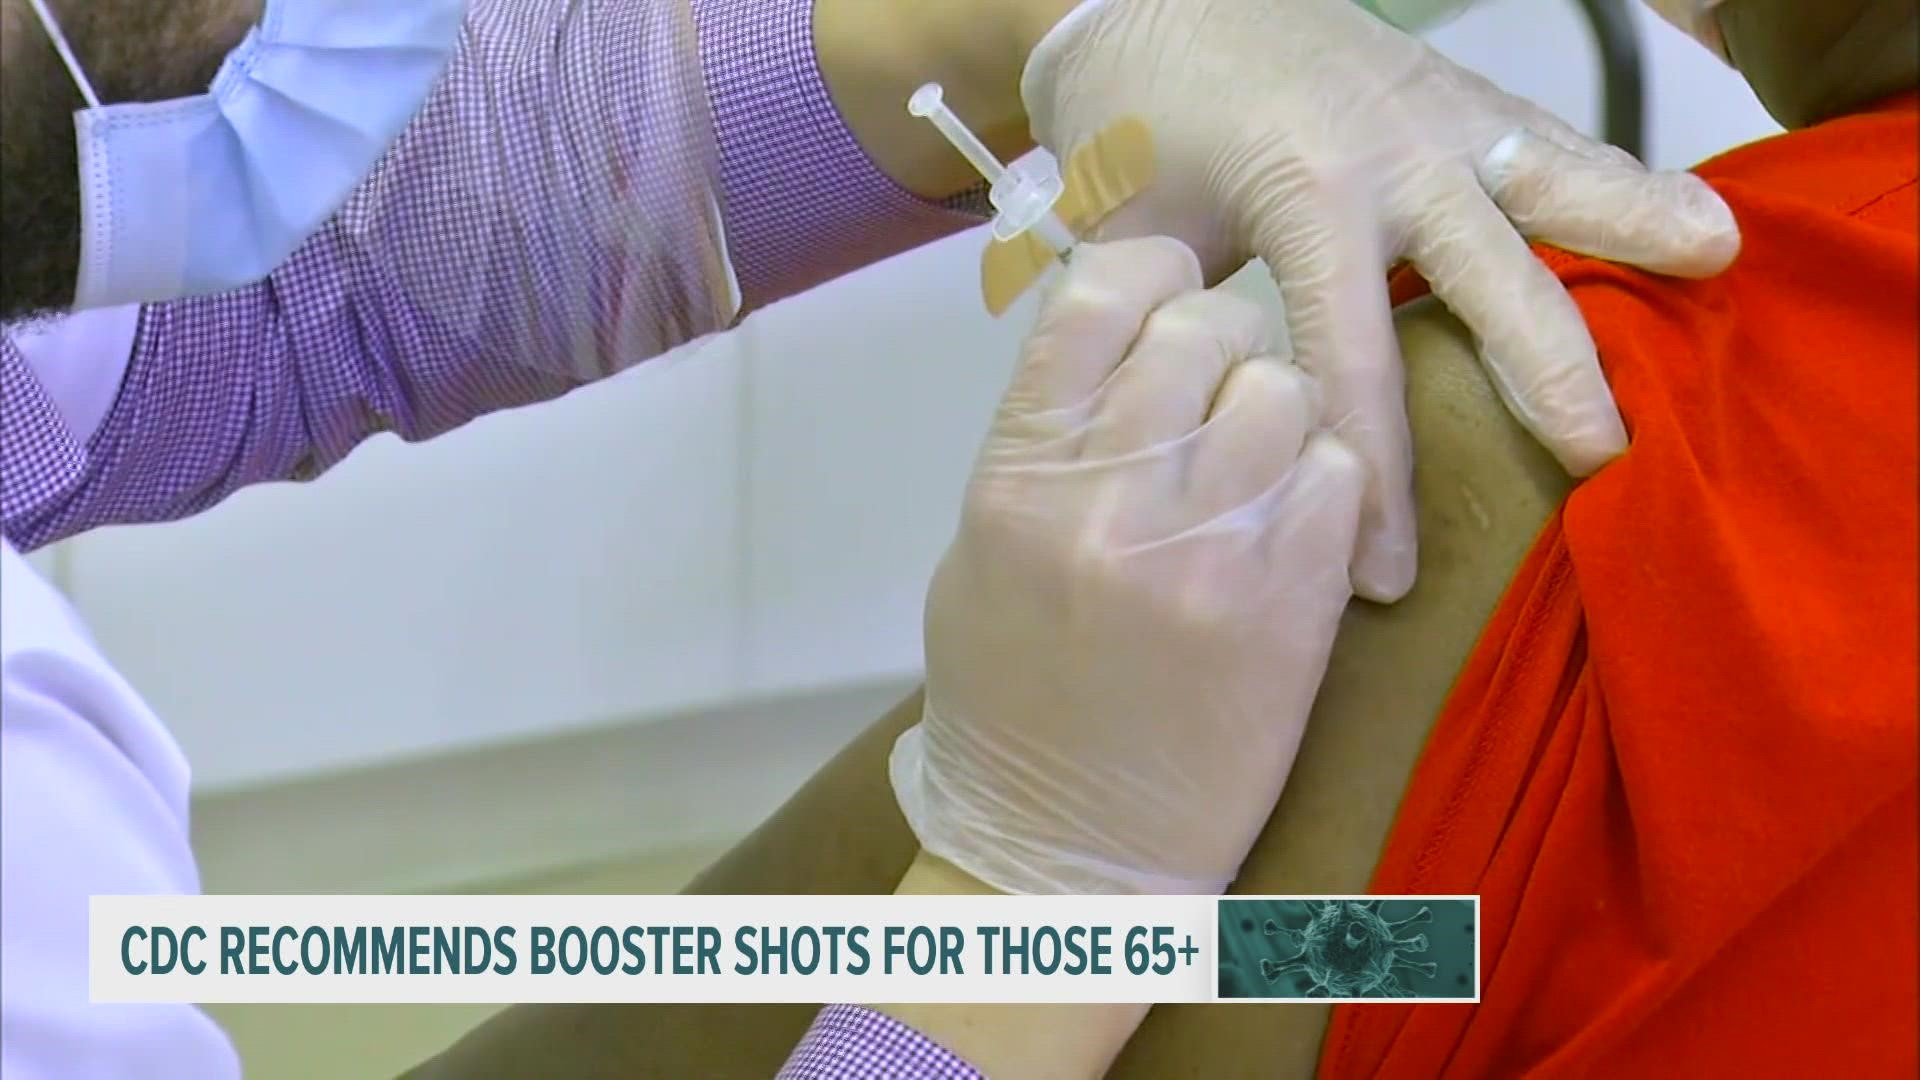 Despite the FDA approving boosters for some, the CDC sets final U.S. policy on who qualifies for the extra shot.